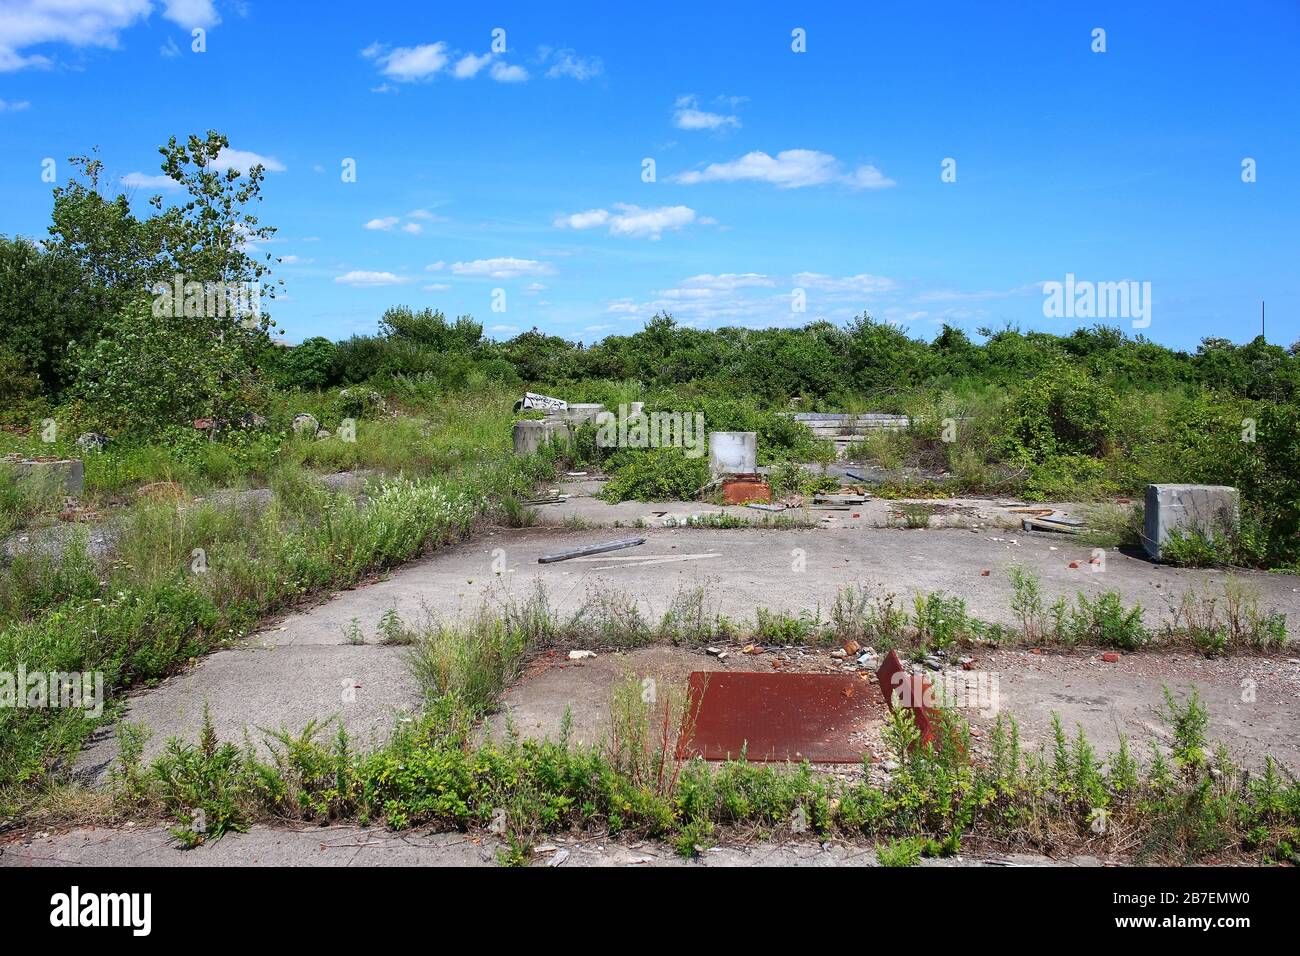 Nike Missile Launch Site NY-49 is an old military structure, which dates back to 1955, seen here on August 11th, 2019 in Queens, New York, U Stock Photo - Alamy